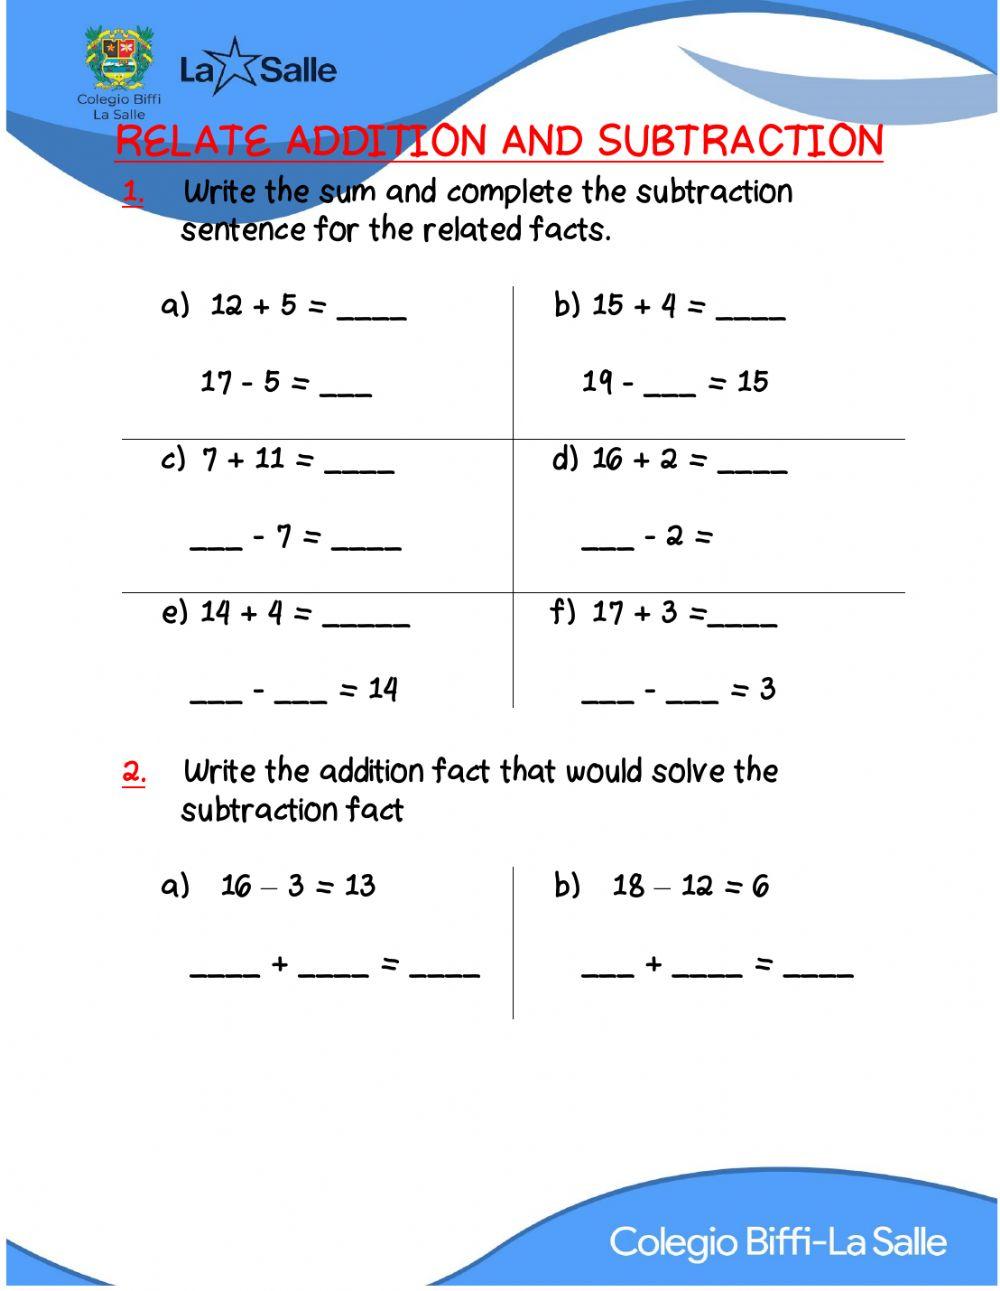 Relate additions and subtractions